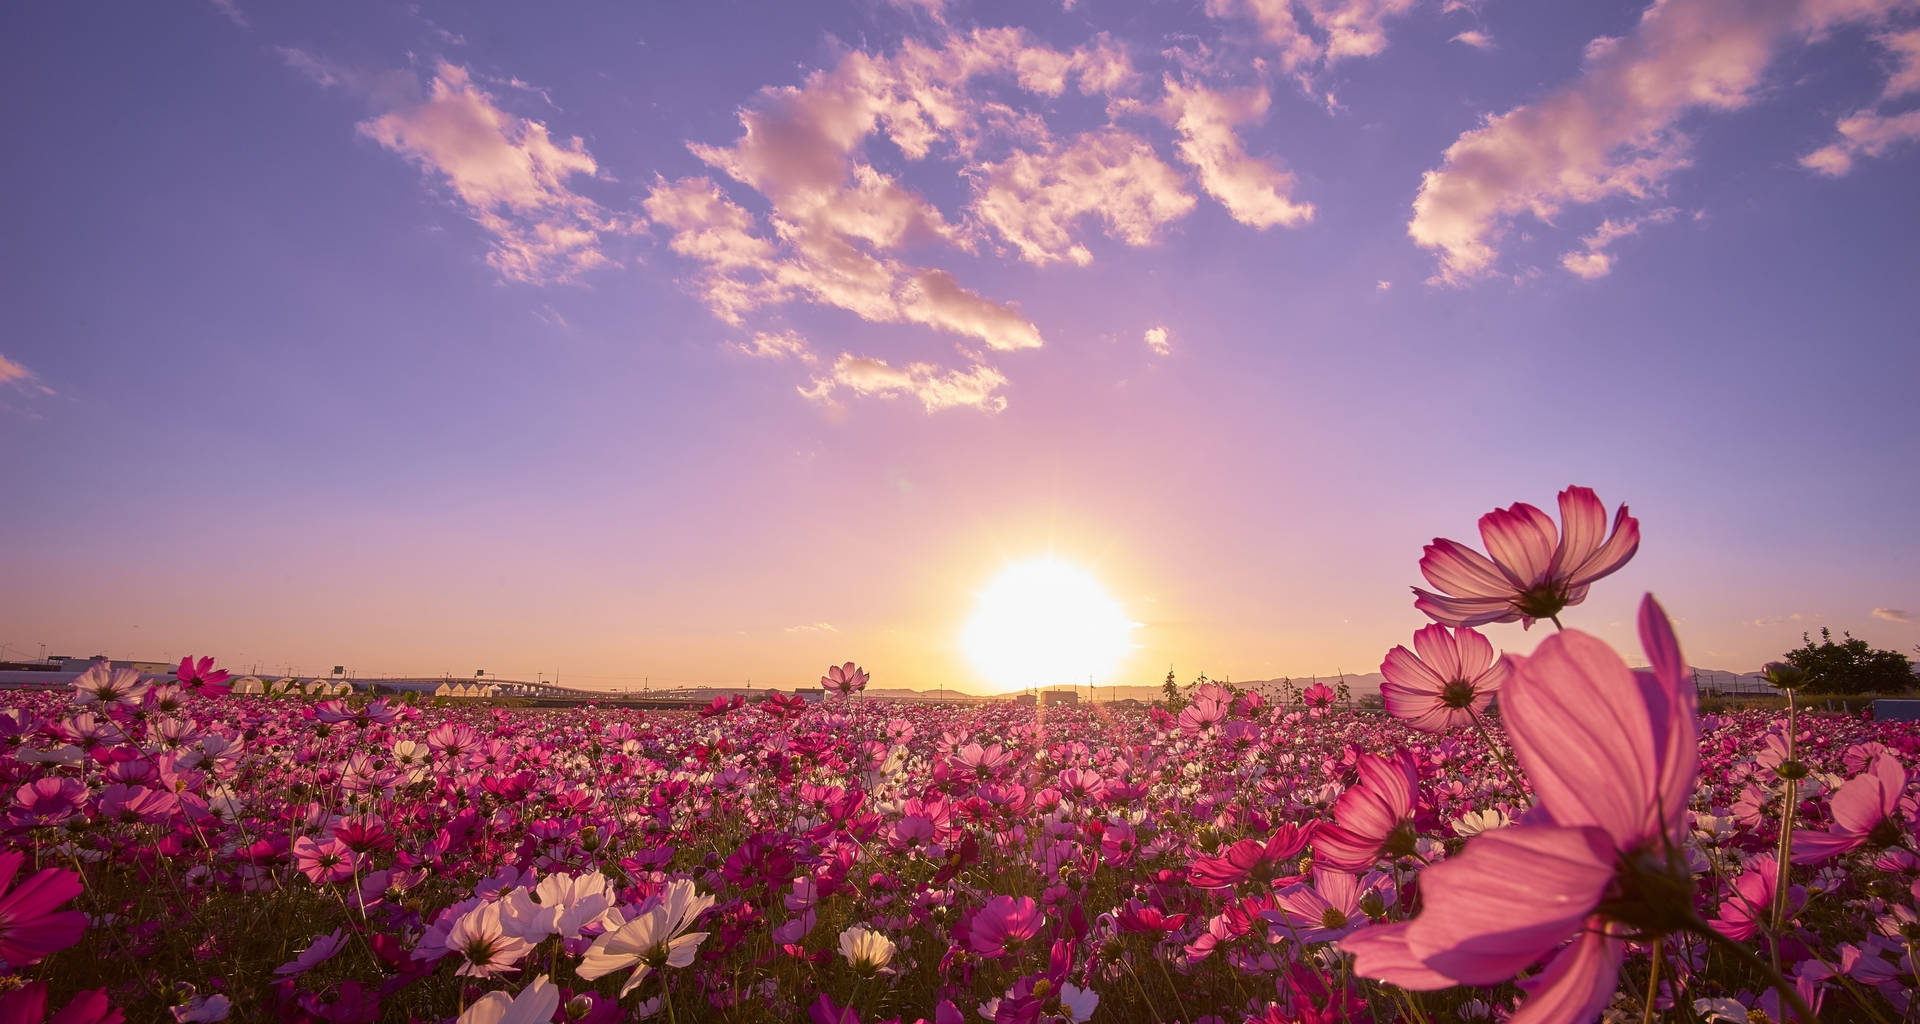 A Field Of Pink Flowers With The Sun Setting Behind Them Wallpaper